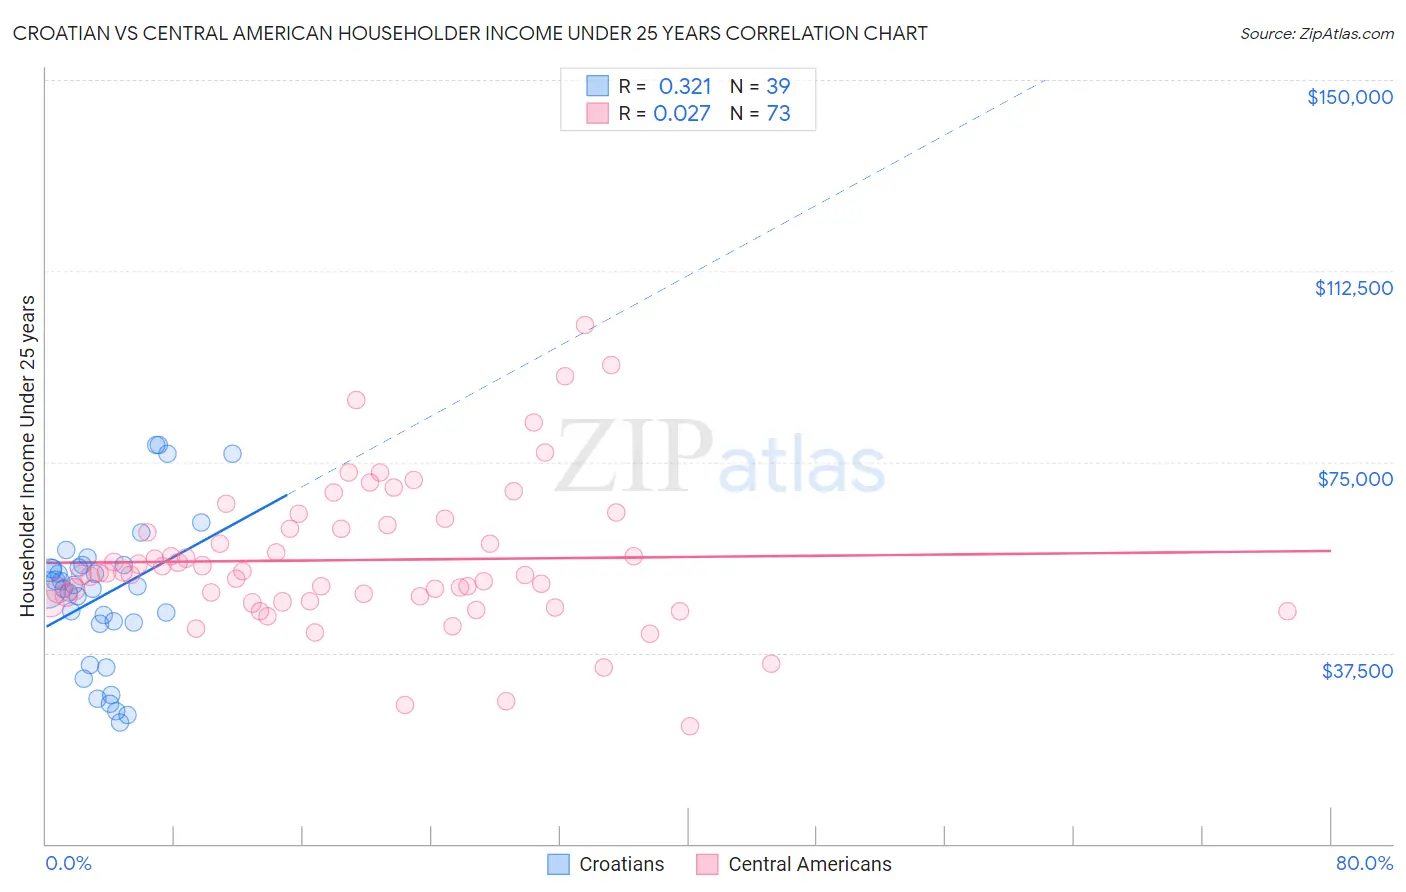 Croatian vs Central American Householder Income Under 25 years